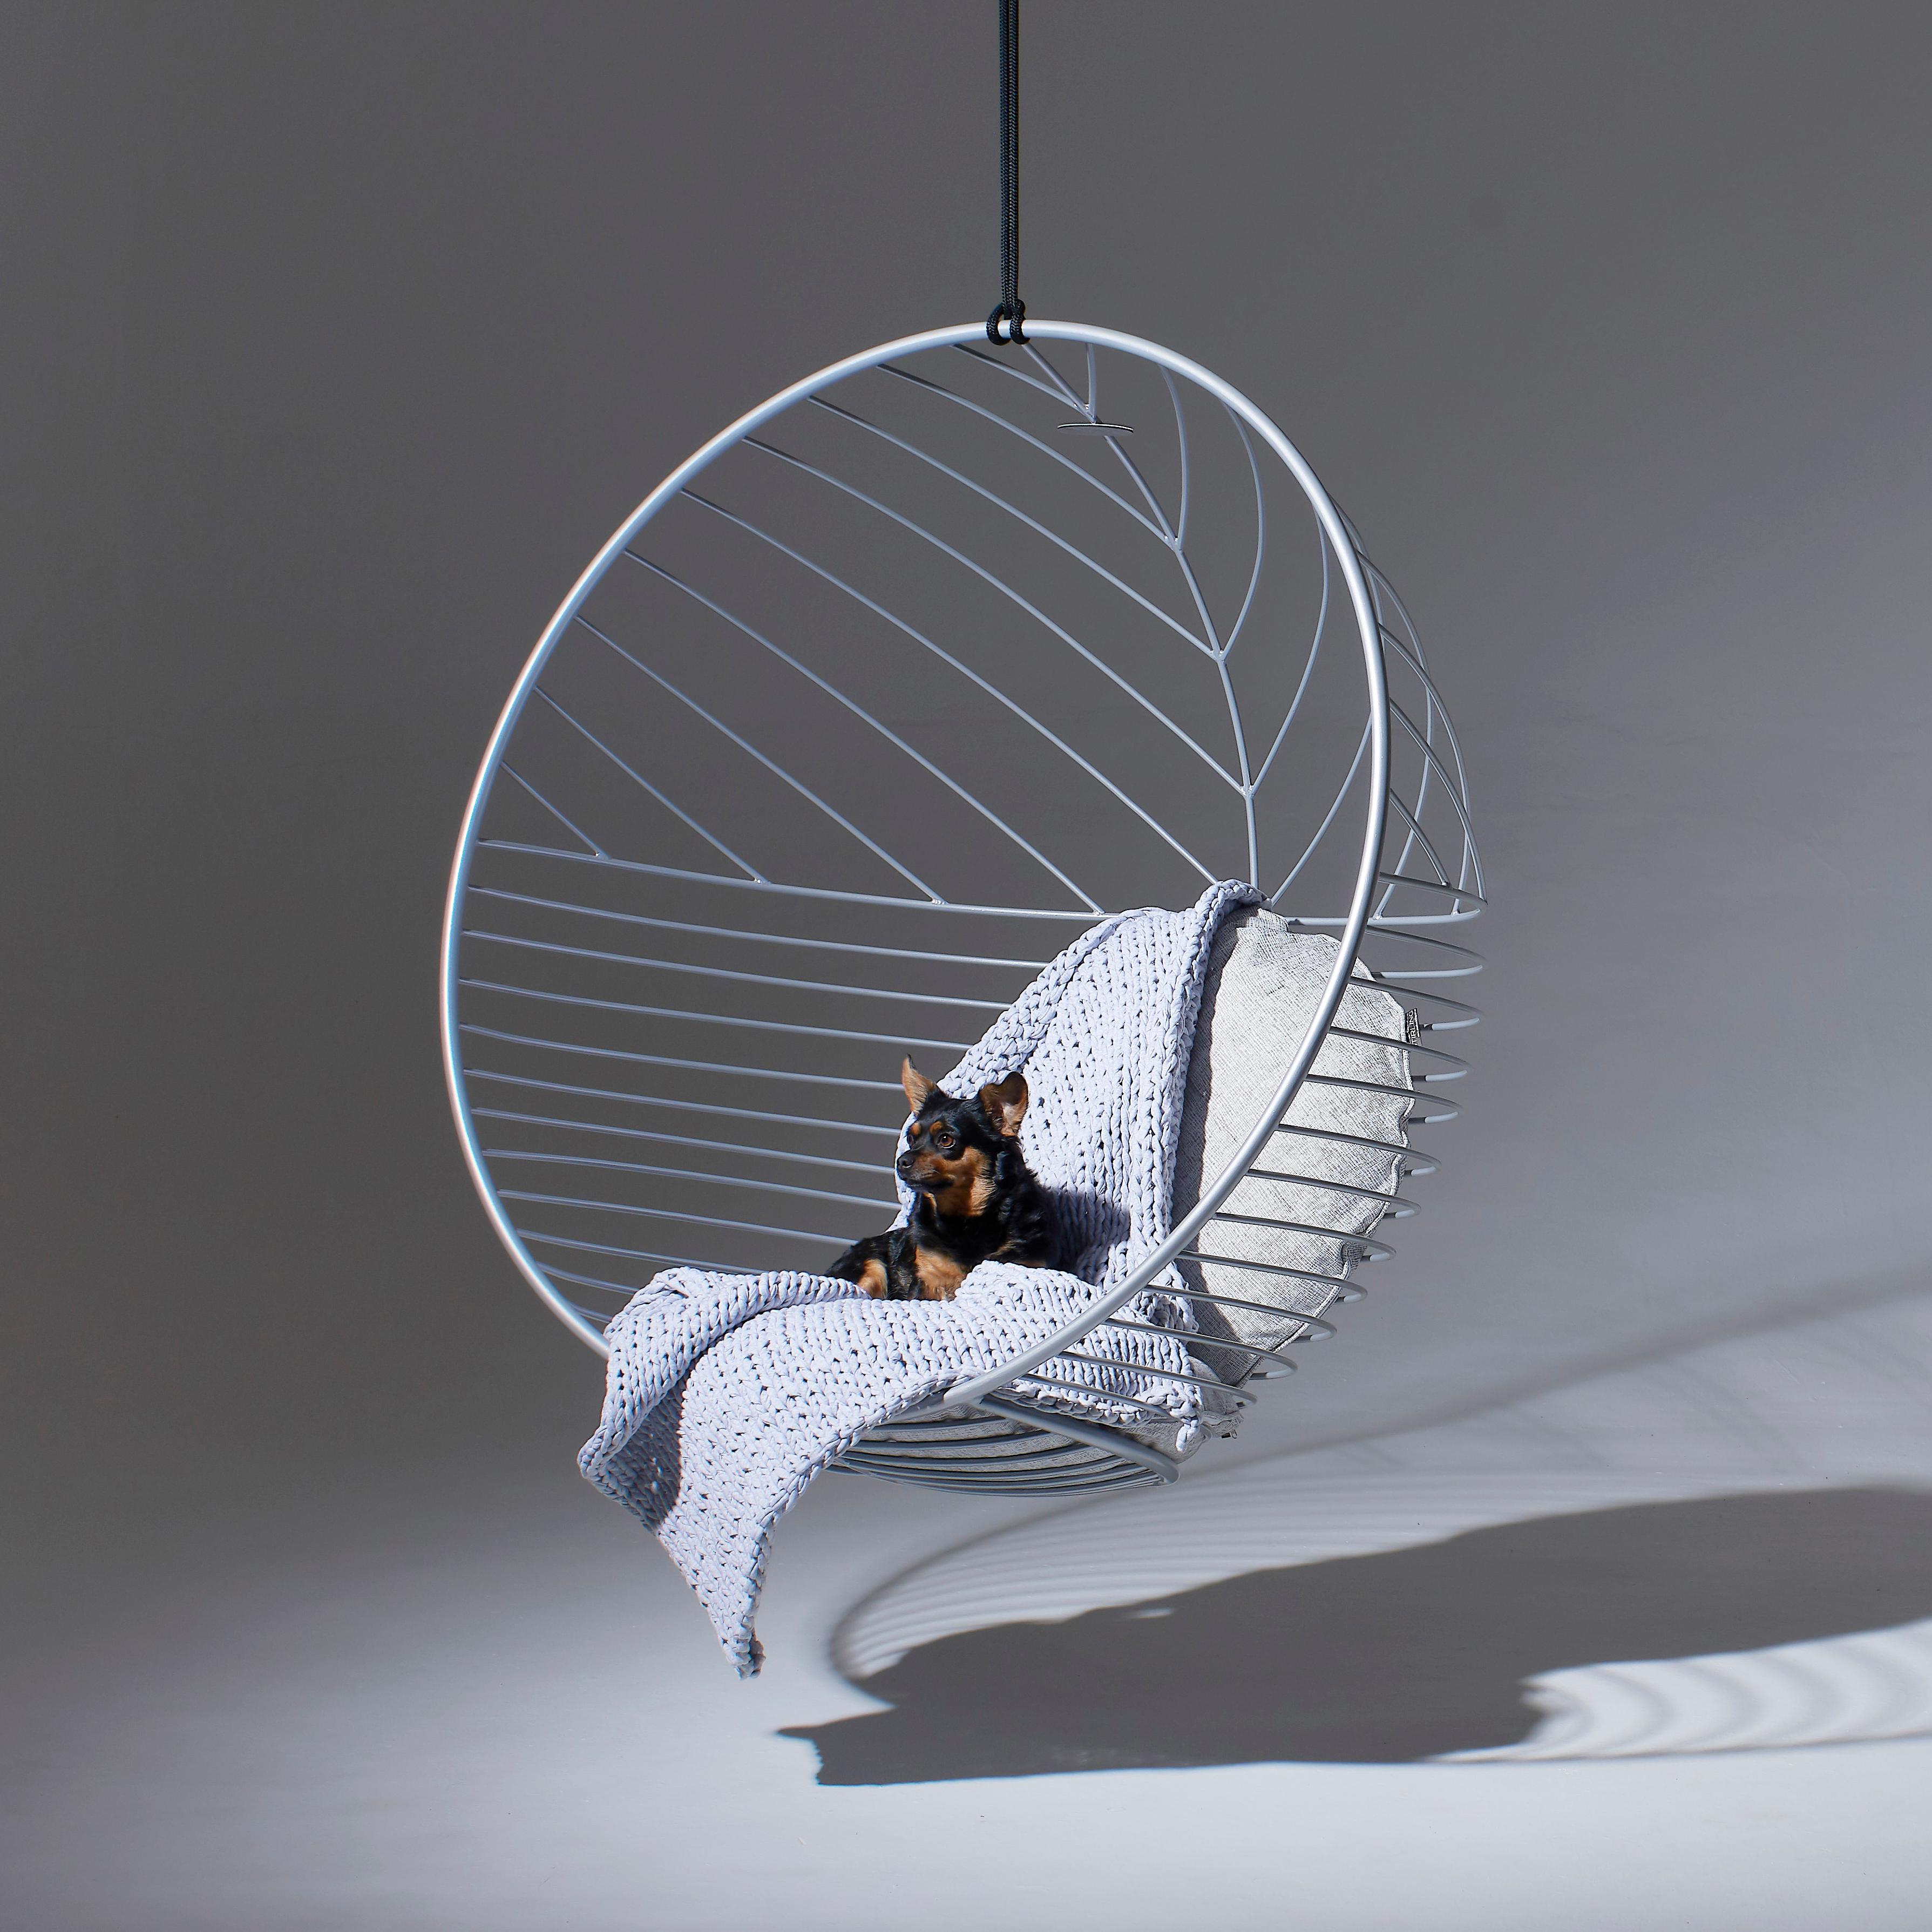 The Bubble hanging swing chairs’ round shape creates a cozy feel.
The is available in modern patterns that are striking in its visual appeal.

The chair has been designed to be very comfortable and relaxing. Ideal for ‘chilling’ in, reading a